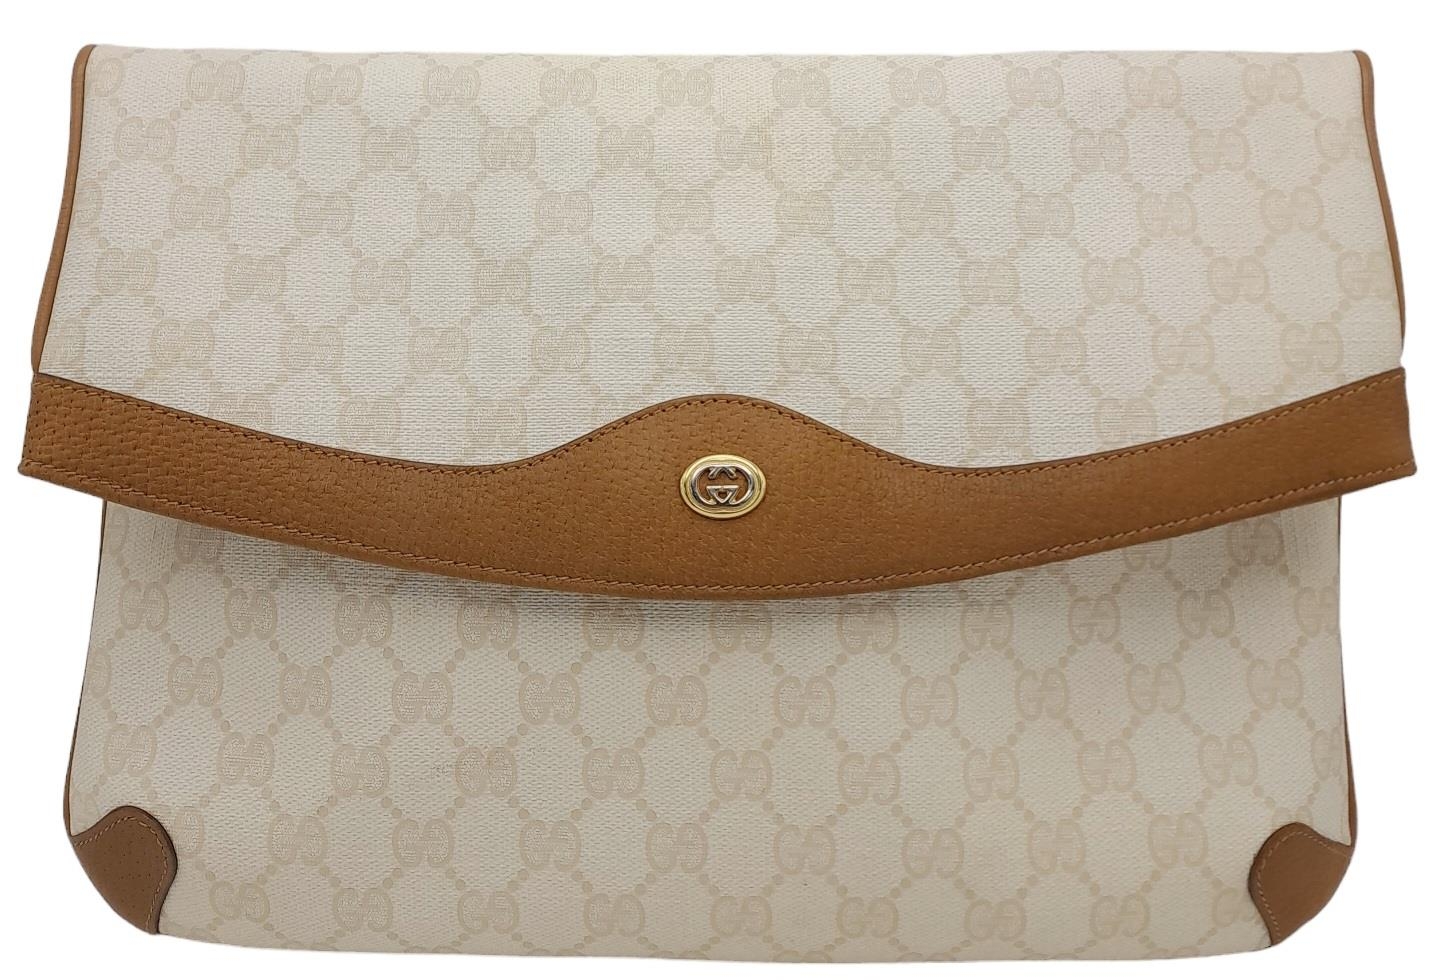 A Gucci Ivory GG Monogram Clutch Bag. Leather exterior with brown trim, gold and silver-toned GG,